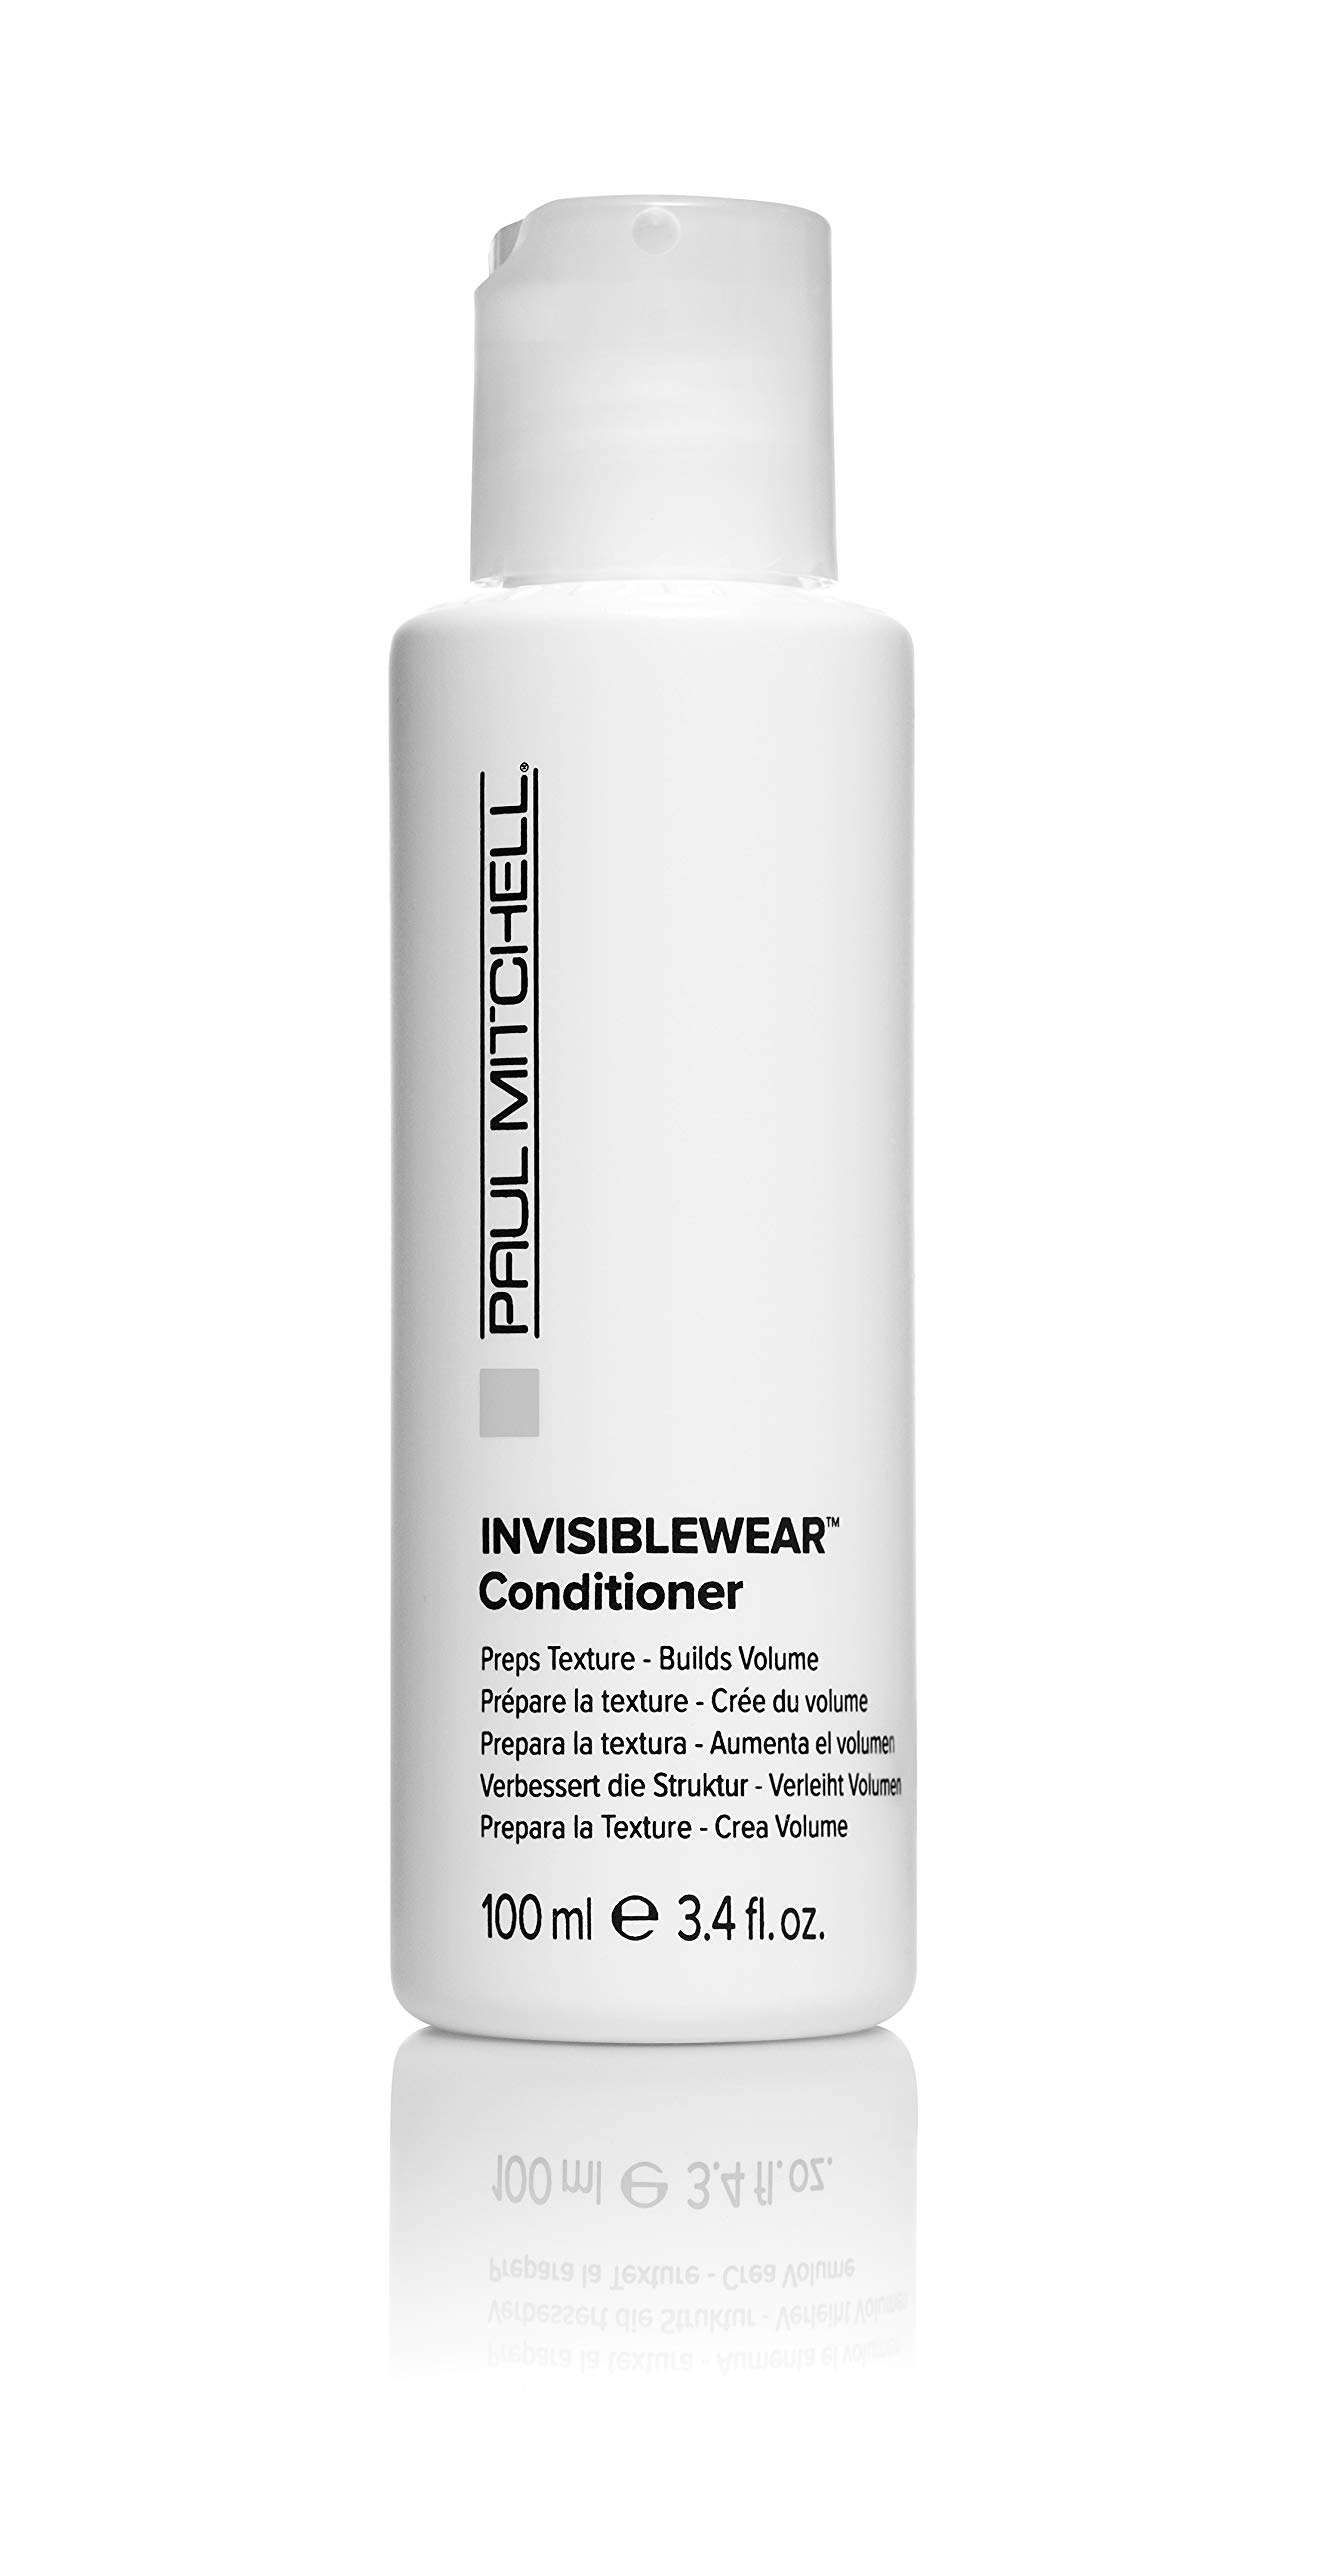 Paul Mitchell Invisiblewear Conditioner, Preps Texture + Builds Volume, For Fine Hair (Pack of 1)